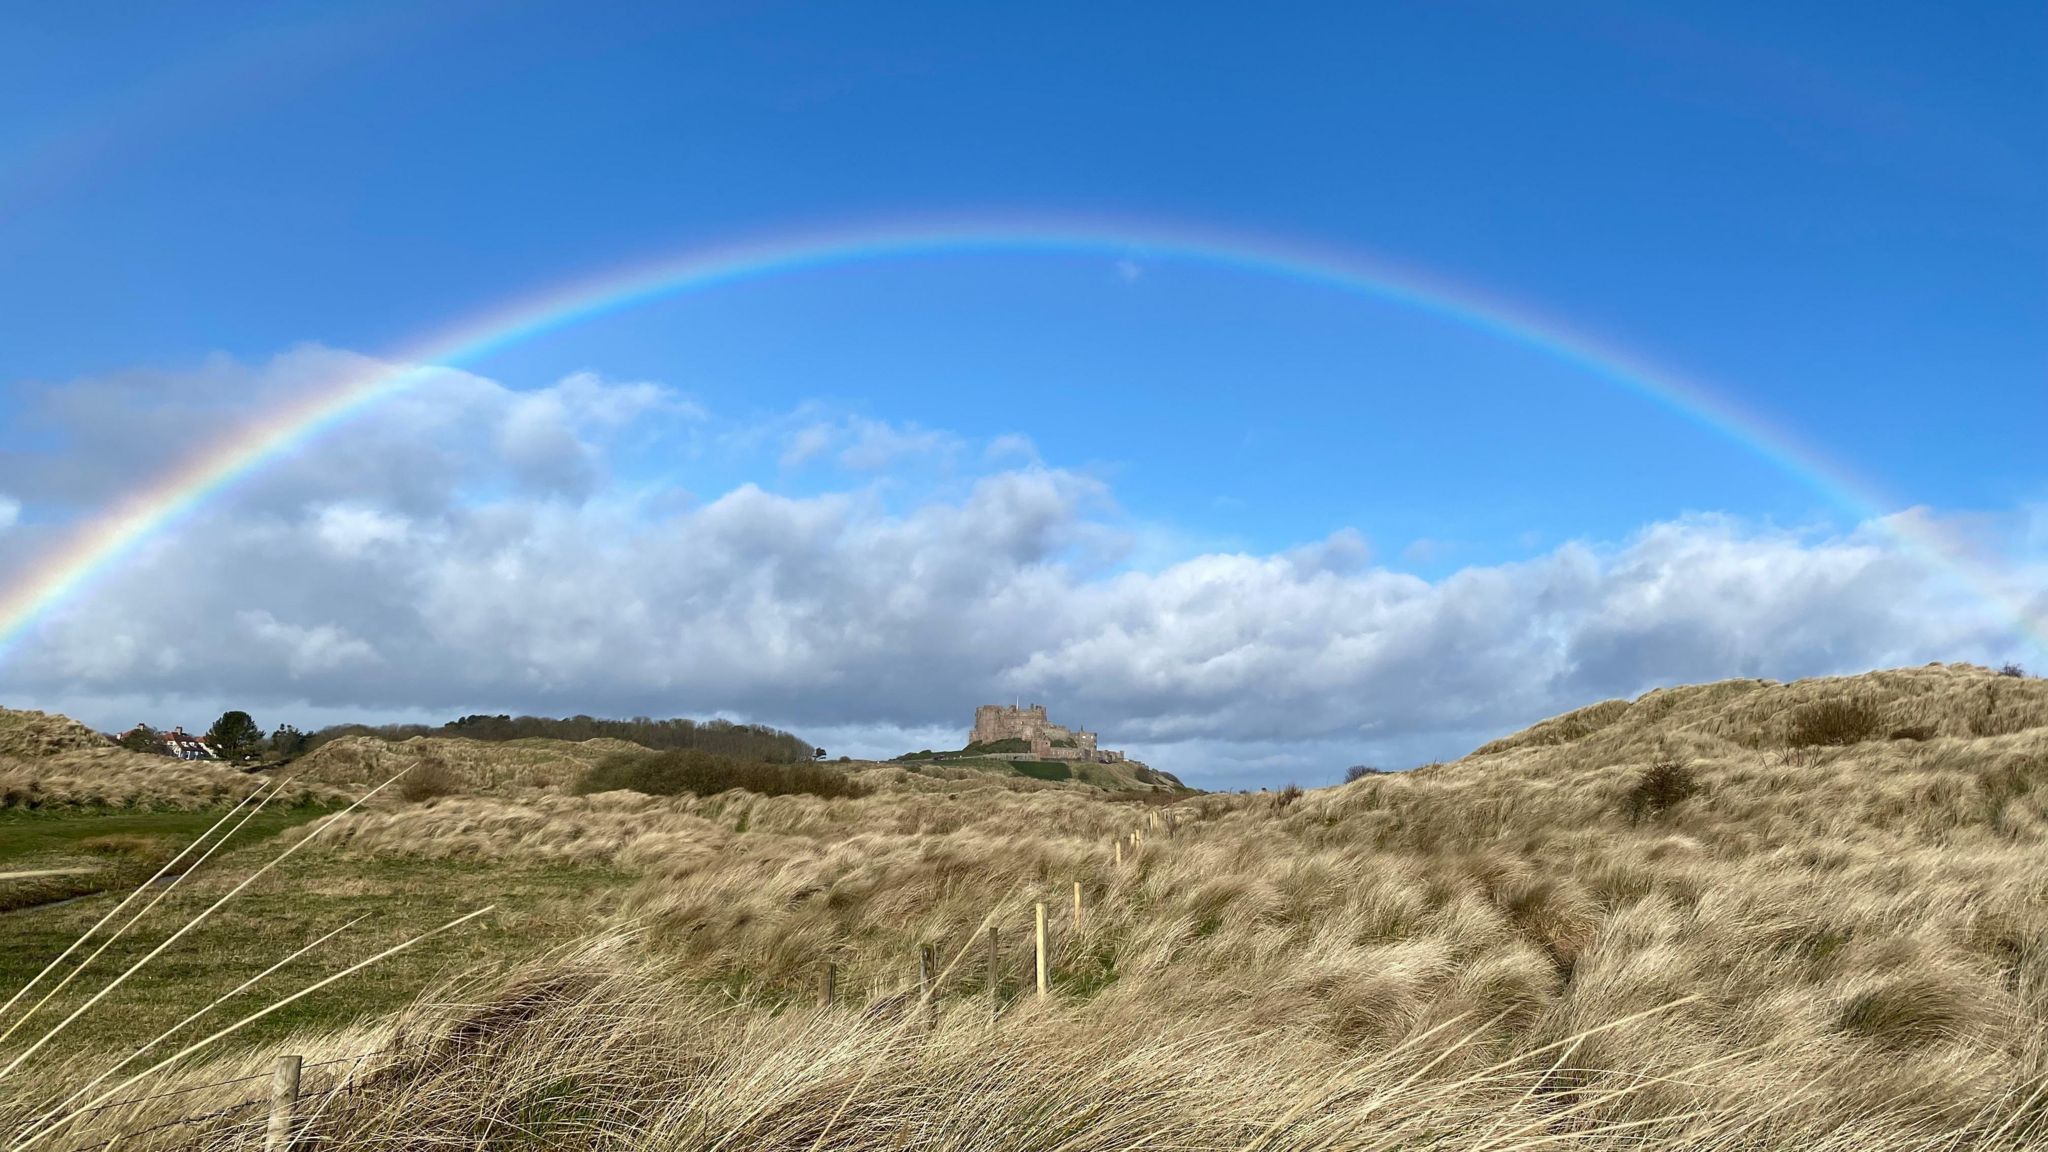 Mainly blue sky with a double rainbow and shower clouds in the distance over Bamburgh Castle